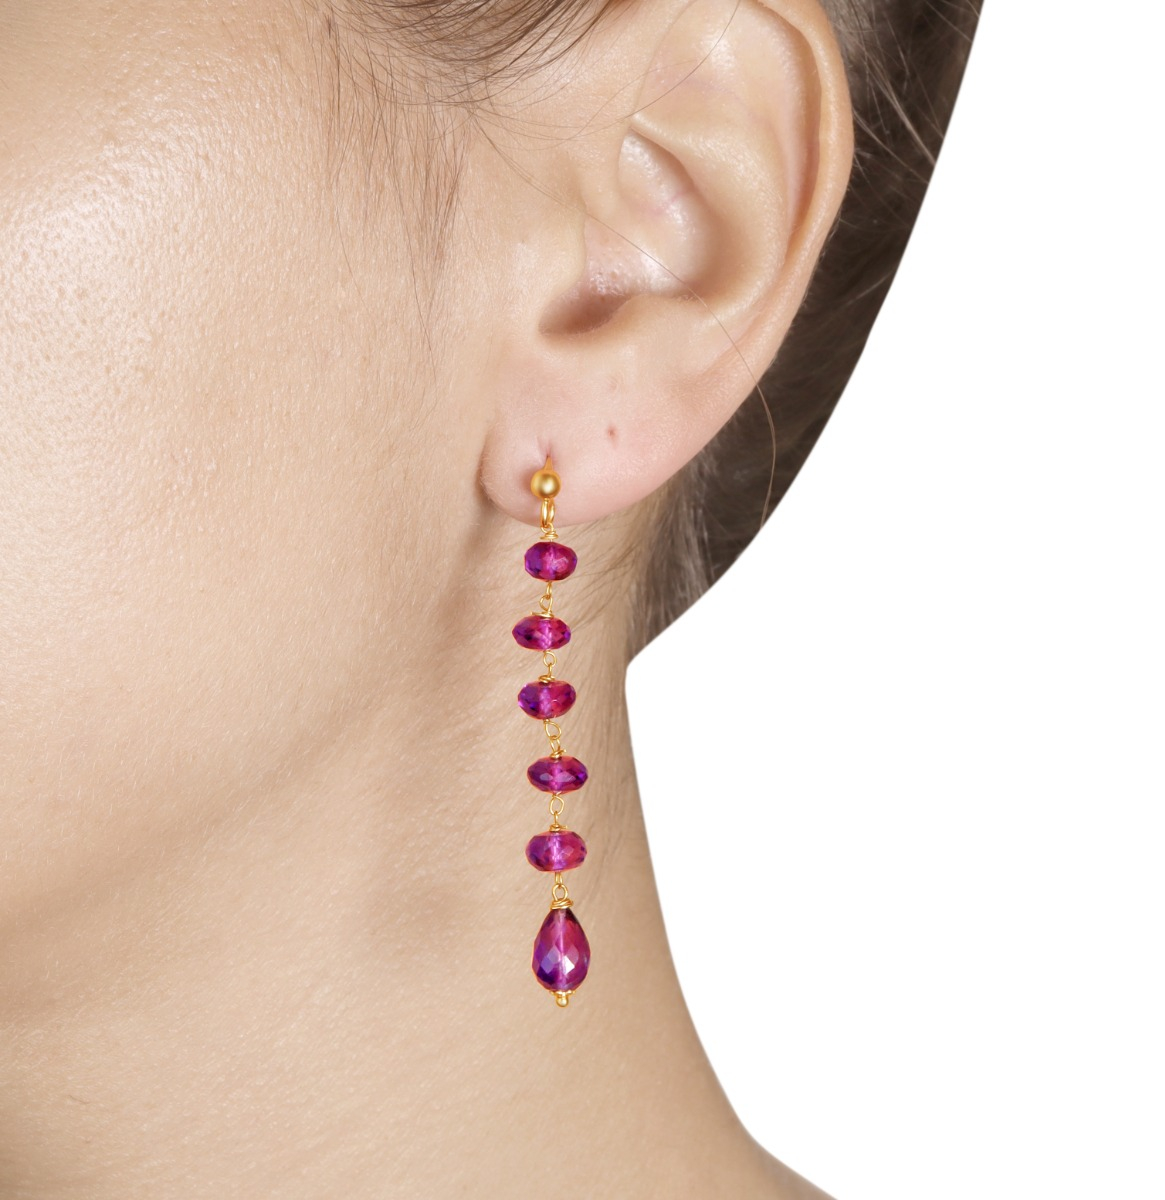 Pendant Earrings With Final Drop In Rose Gold And Amethyst